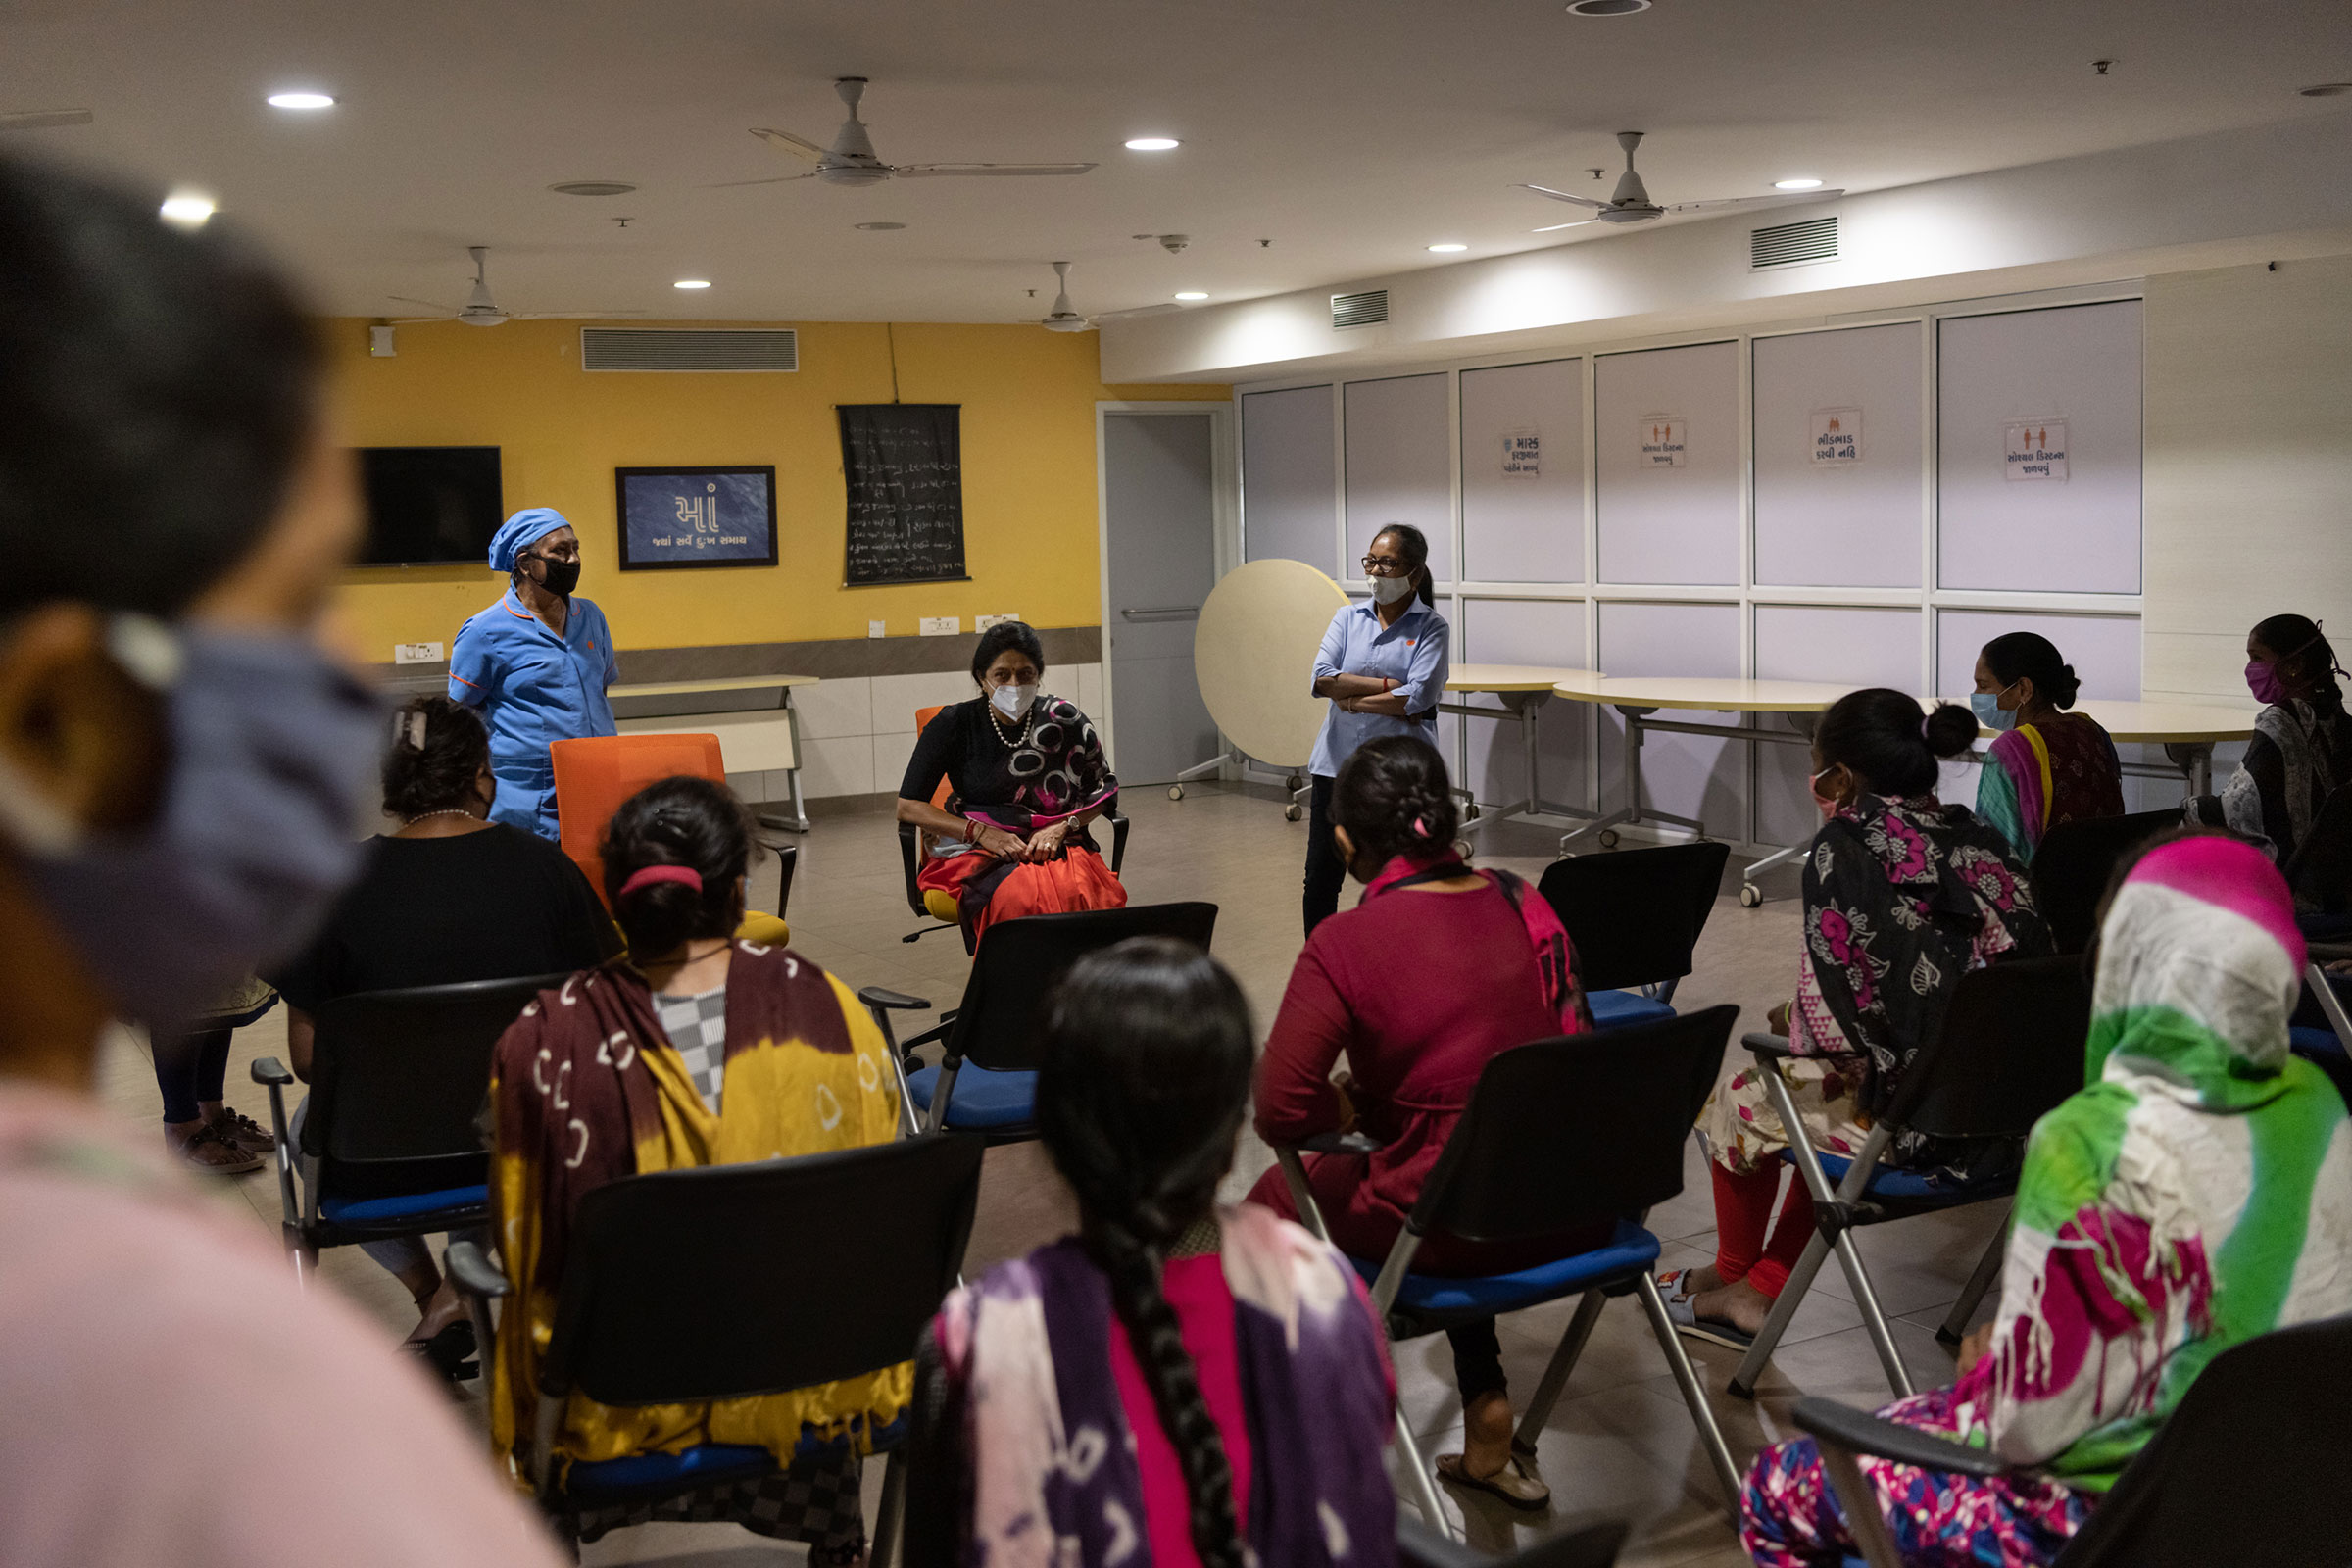 Dr. Nayana Patel, fertility specialist and founder of the Akanksha Hospital, holds a meeting with surrogates in the hospital's basement. The women told TIME that Patel rarely came to speak with them. (Smita Sharma for TIME)